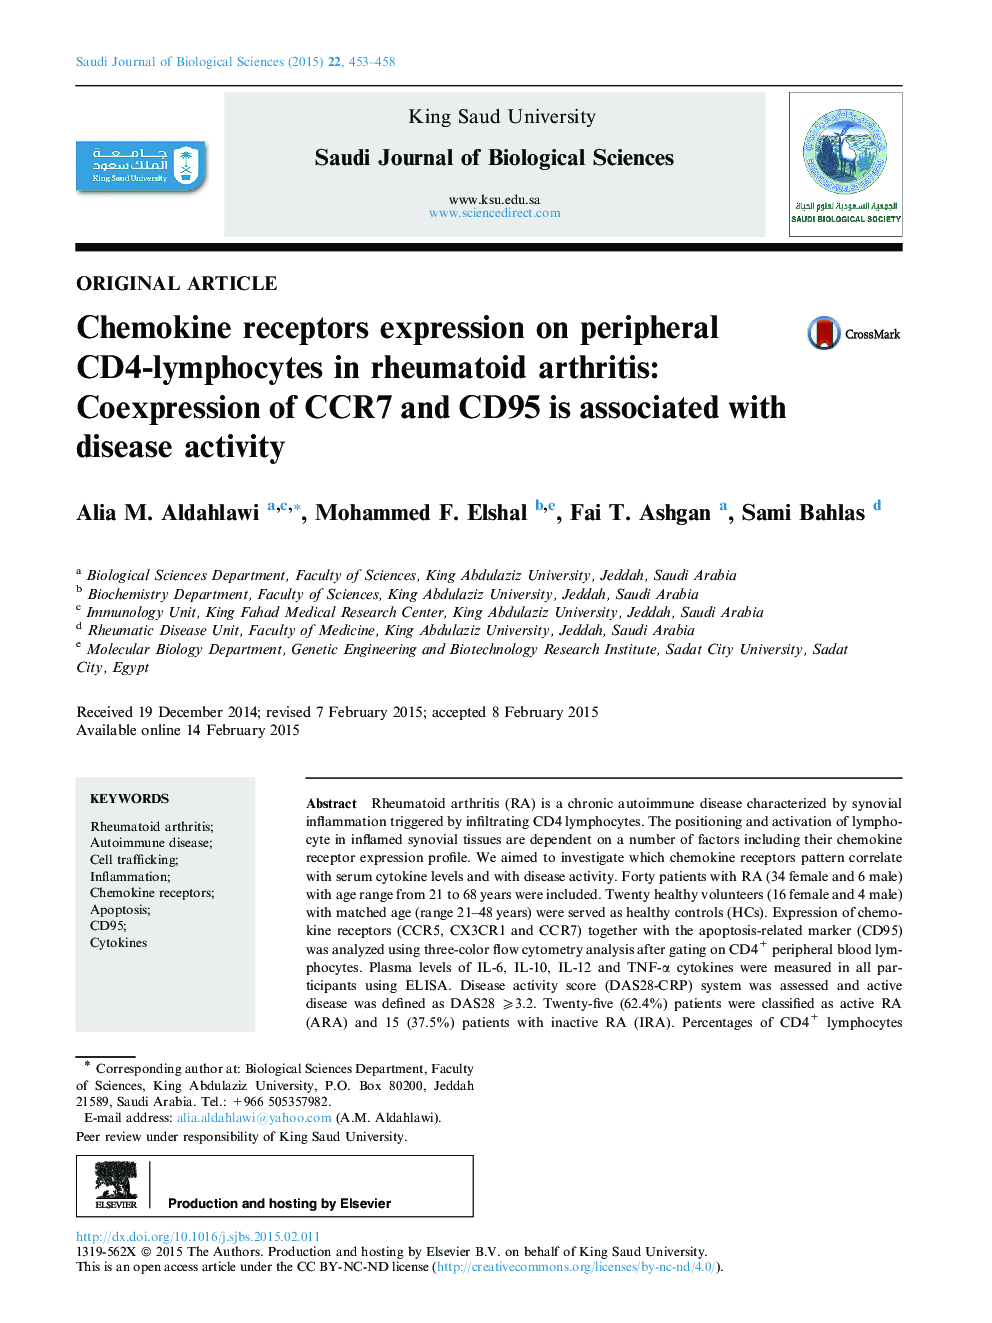 Chemokine receptors expression on peripheral CD4-lymphocytes in rheumatoid arthritis: Coexpression of CCR7 and CD95 is associated with disease activity 